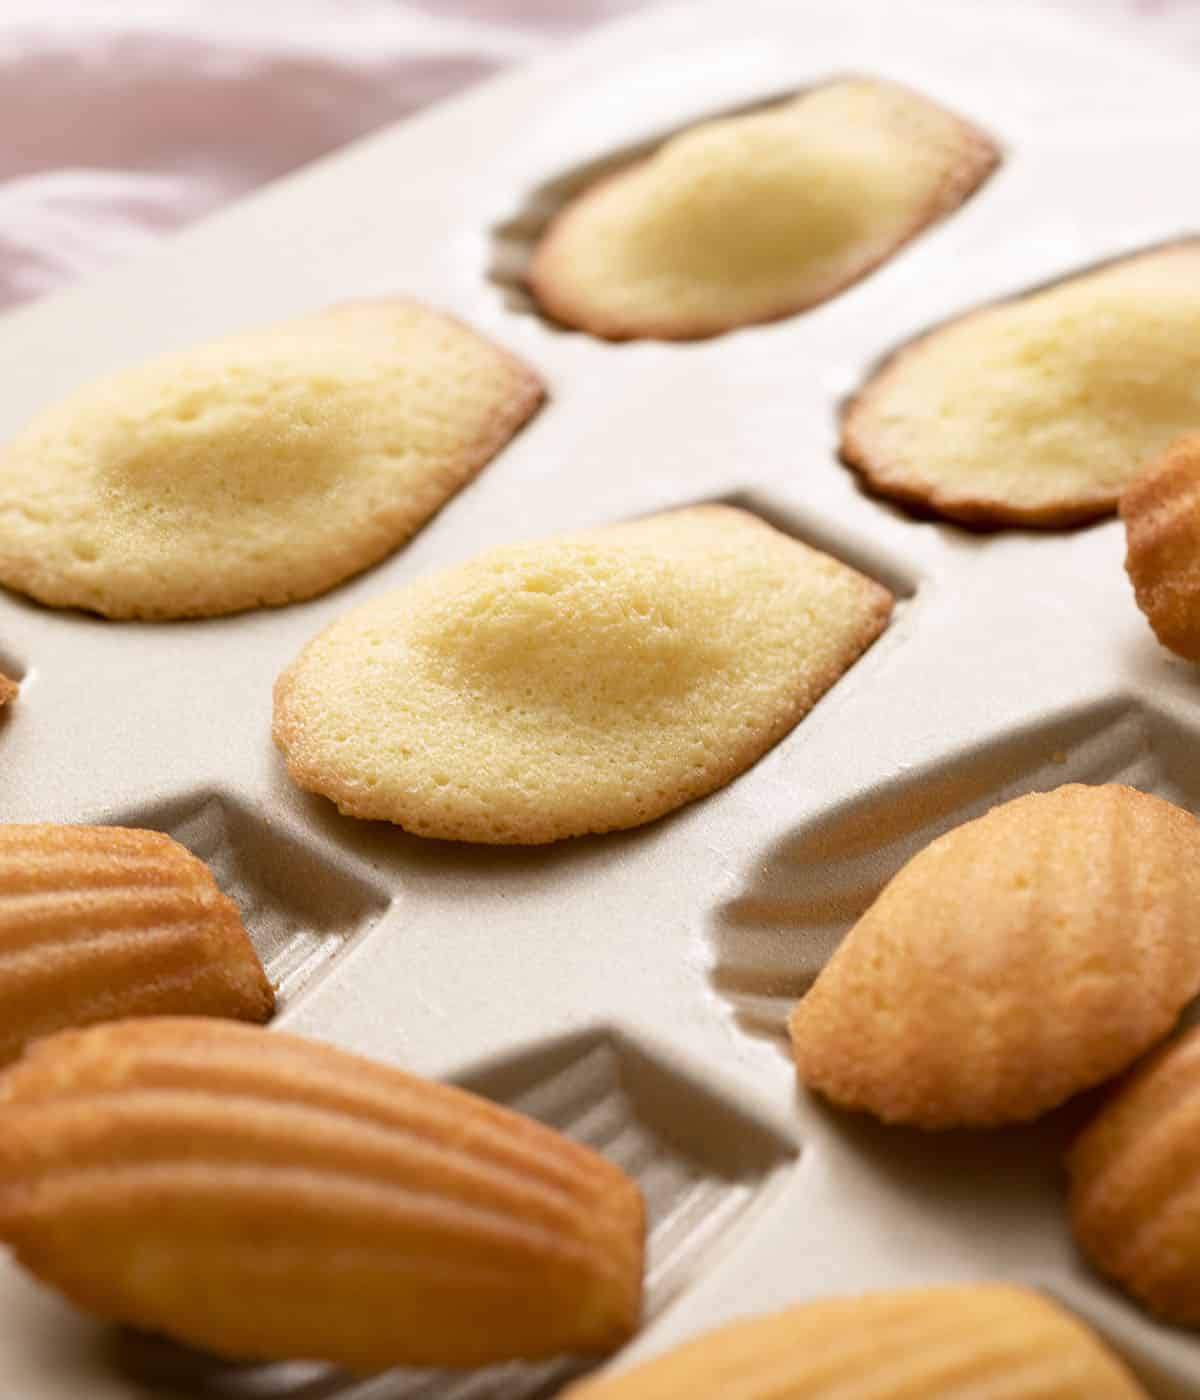 Madeleines cooling in their golden baking tin.